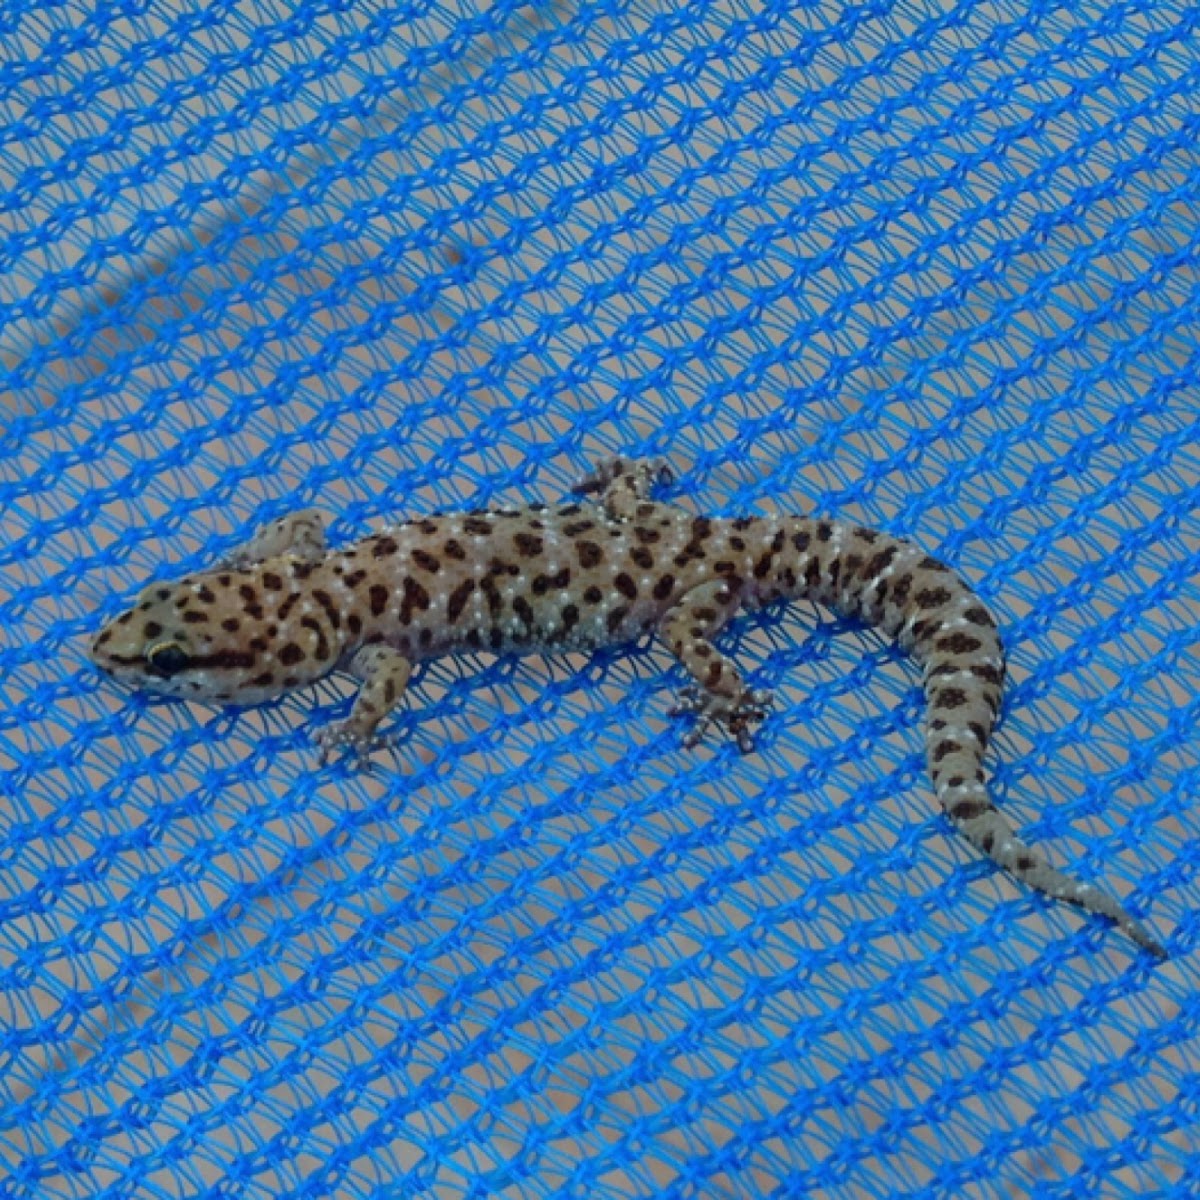 Transvaal Thick toed Gecko